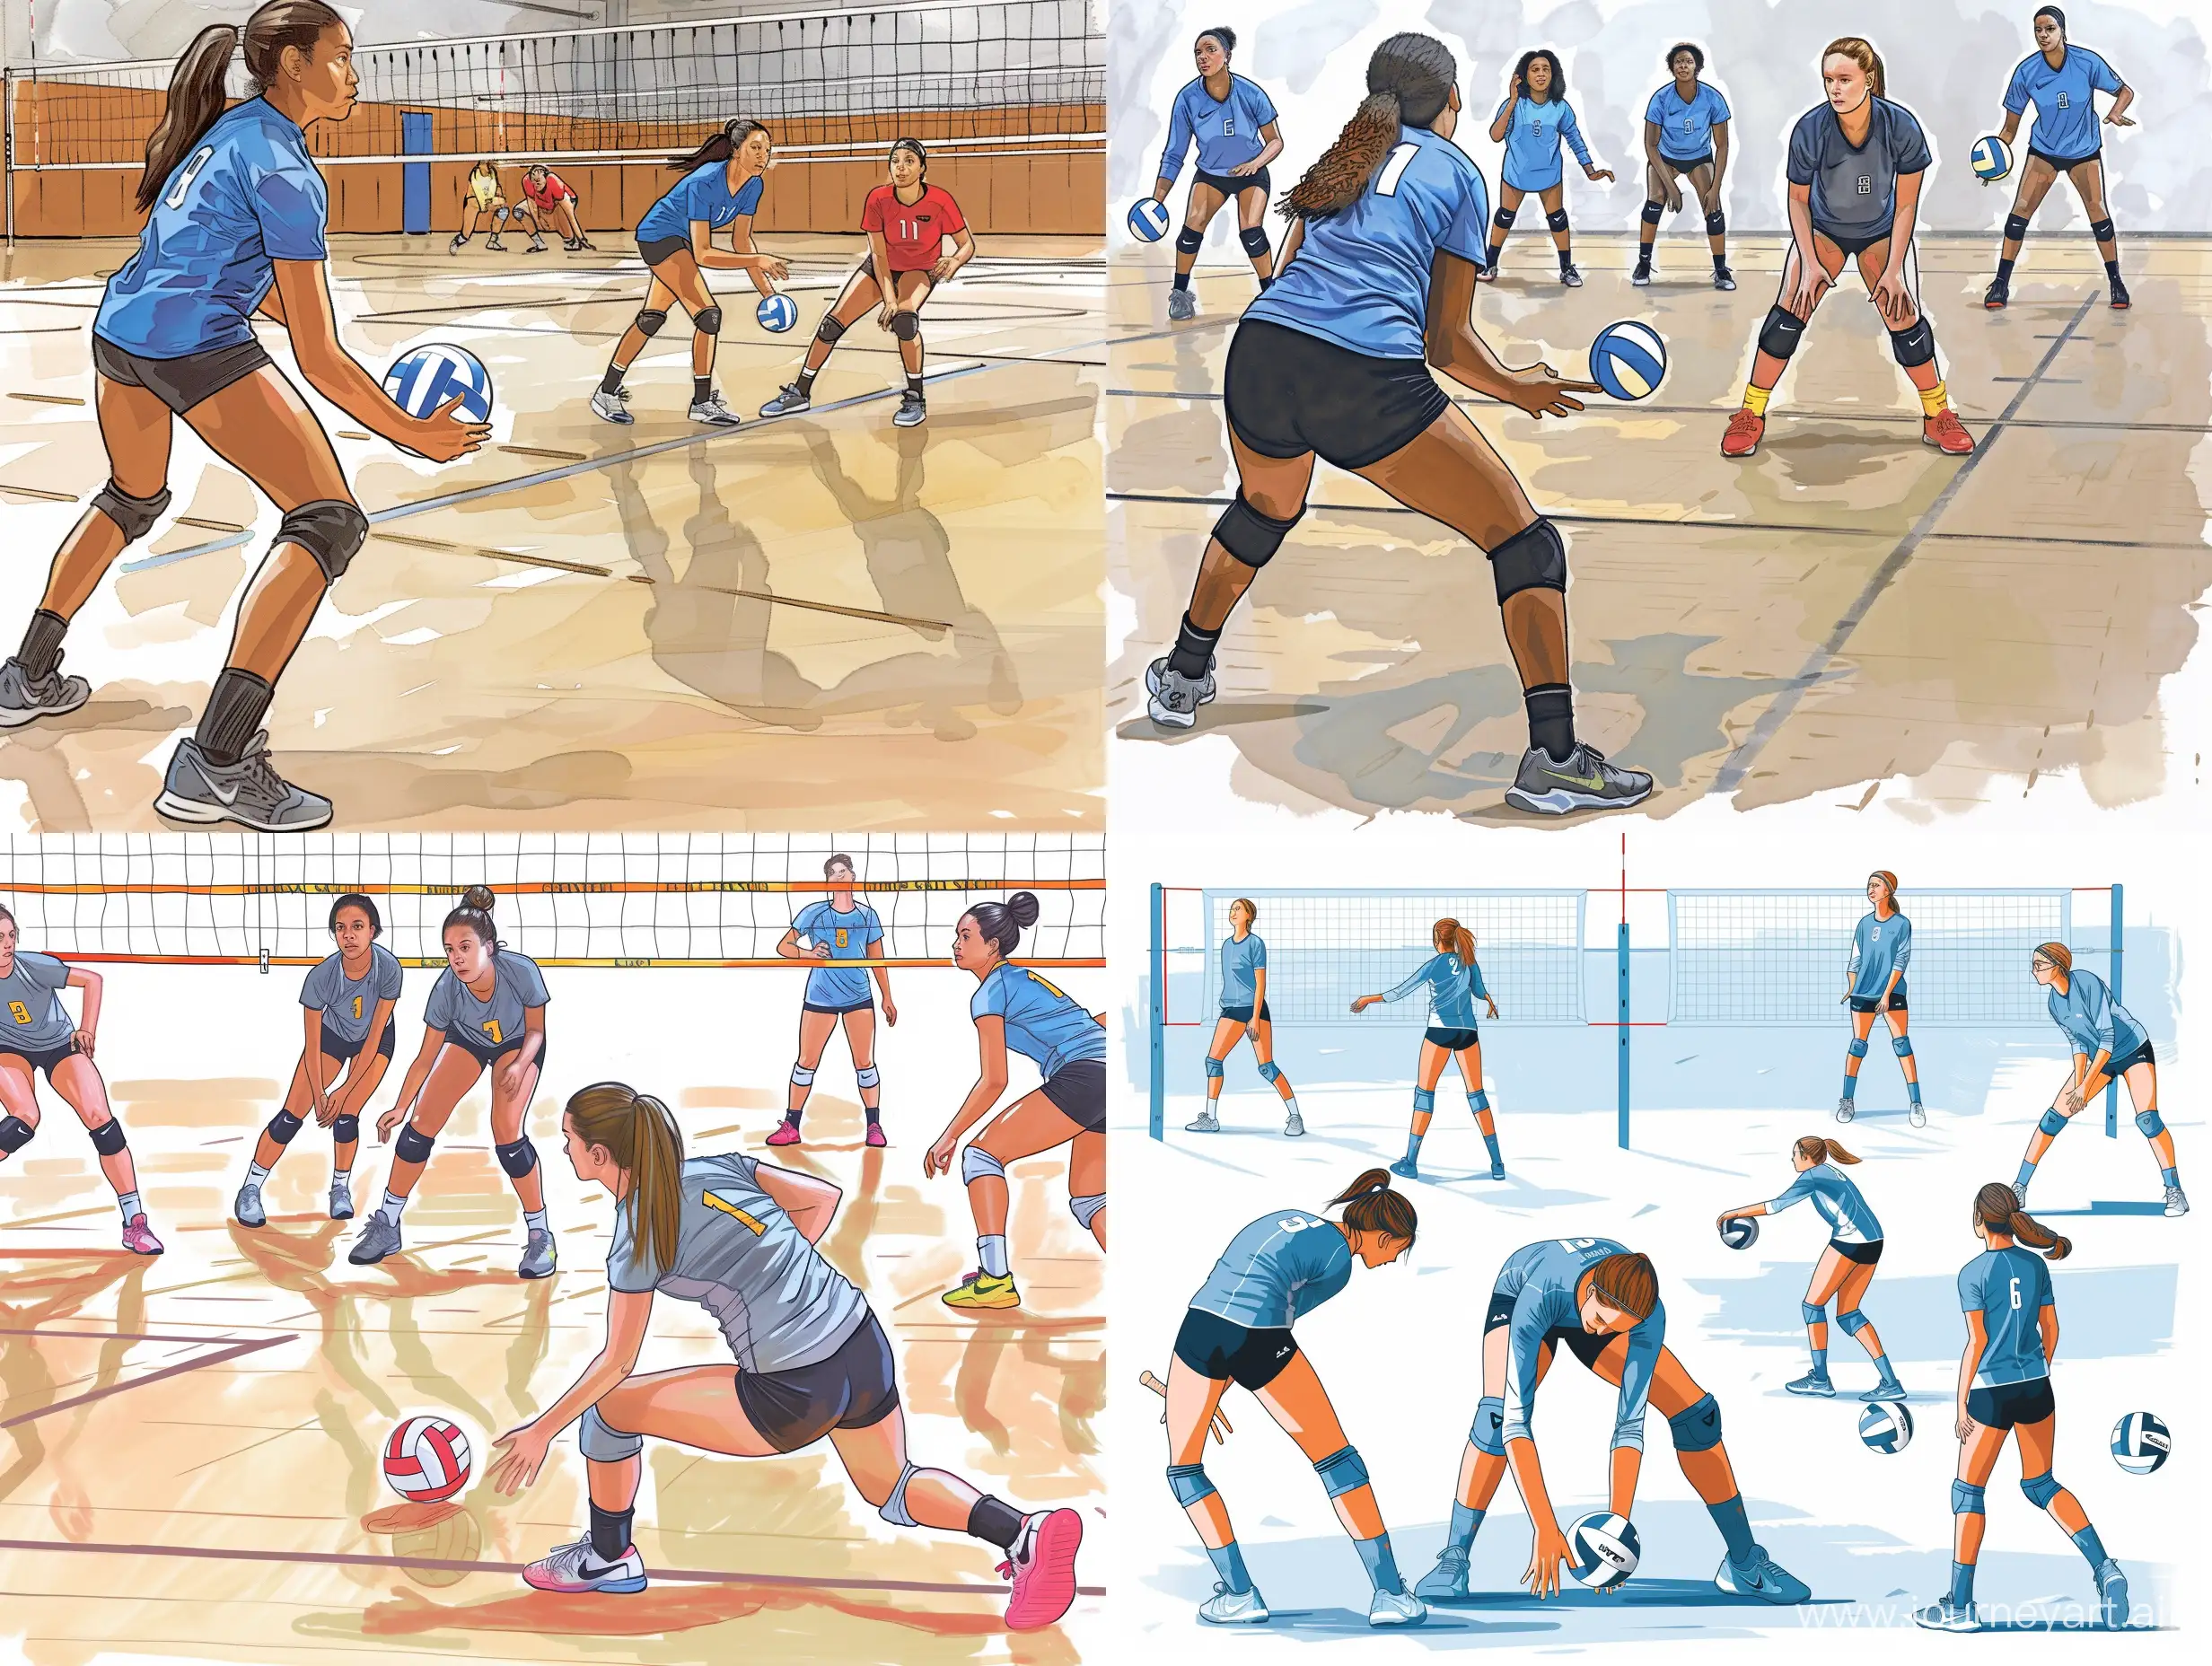 Indoor-Volleyball-Techniques-and-Drills-Graphics-for-Skill-Development